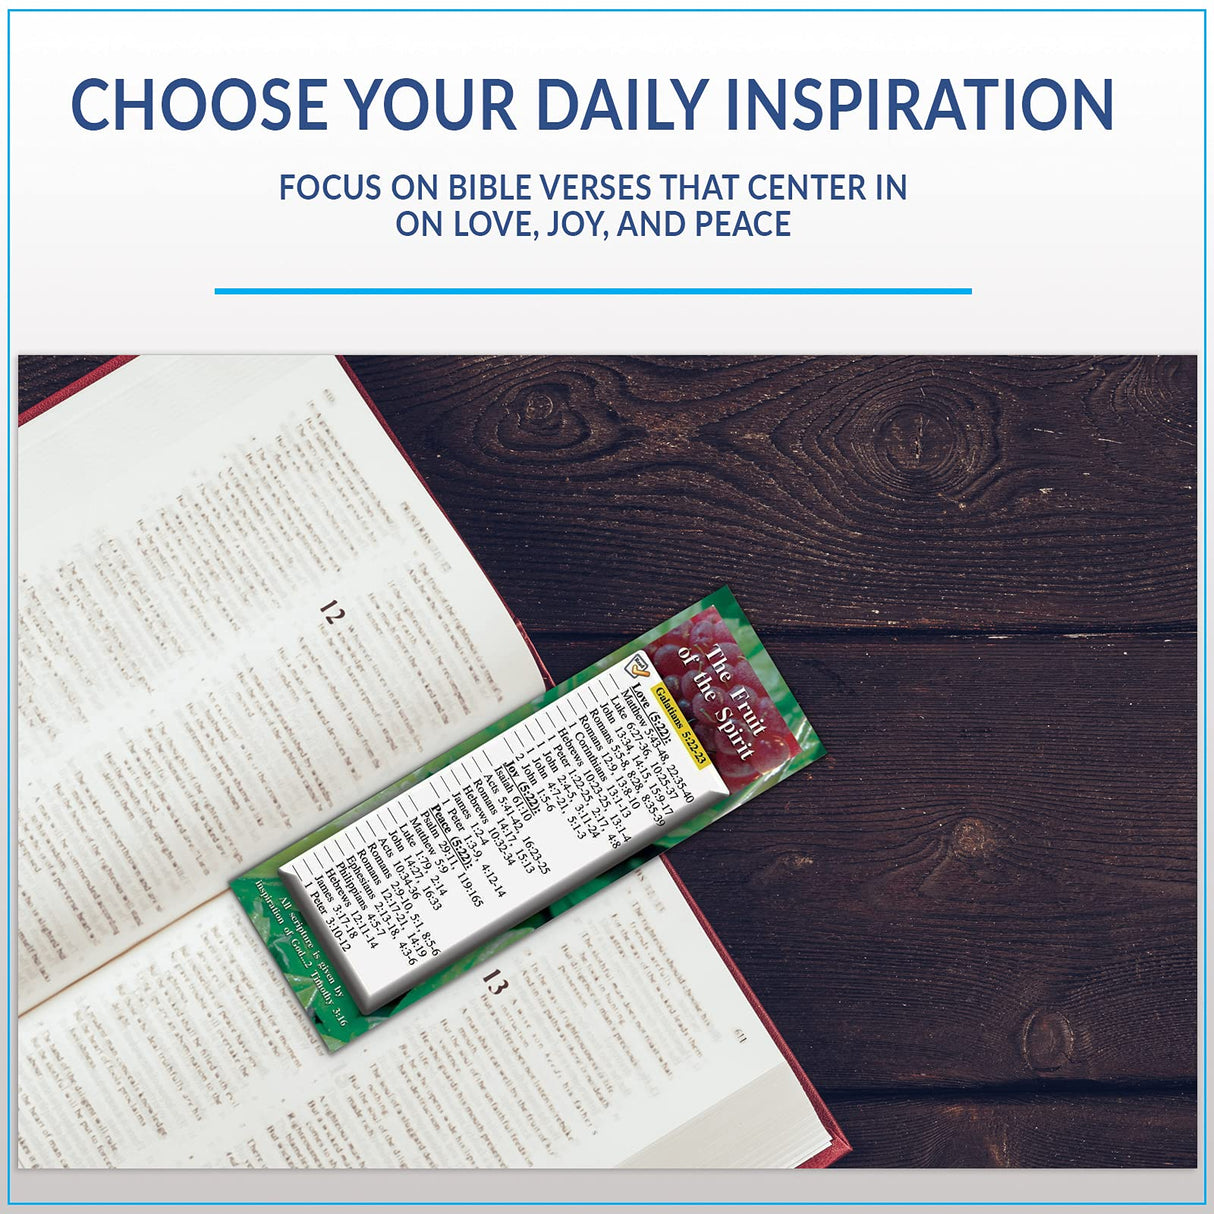 The Fruit of The Spirit Bible Study Cards - Inspirational Scripture Cards, Encourage and Share The Gospel, Full Color, Pack of 25 Religious Bookmarks - 2.75 x 8.25 inches, by eThought